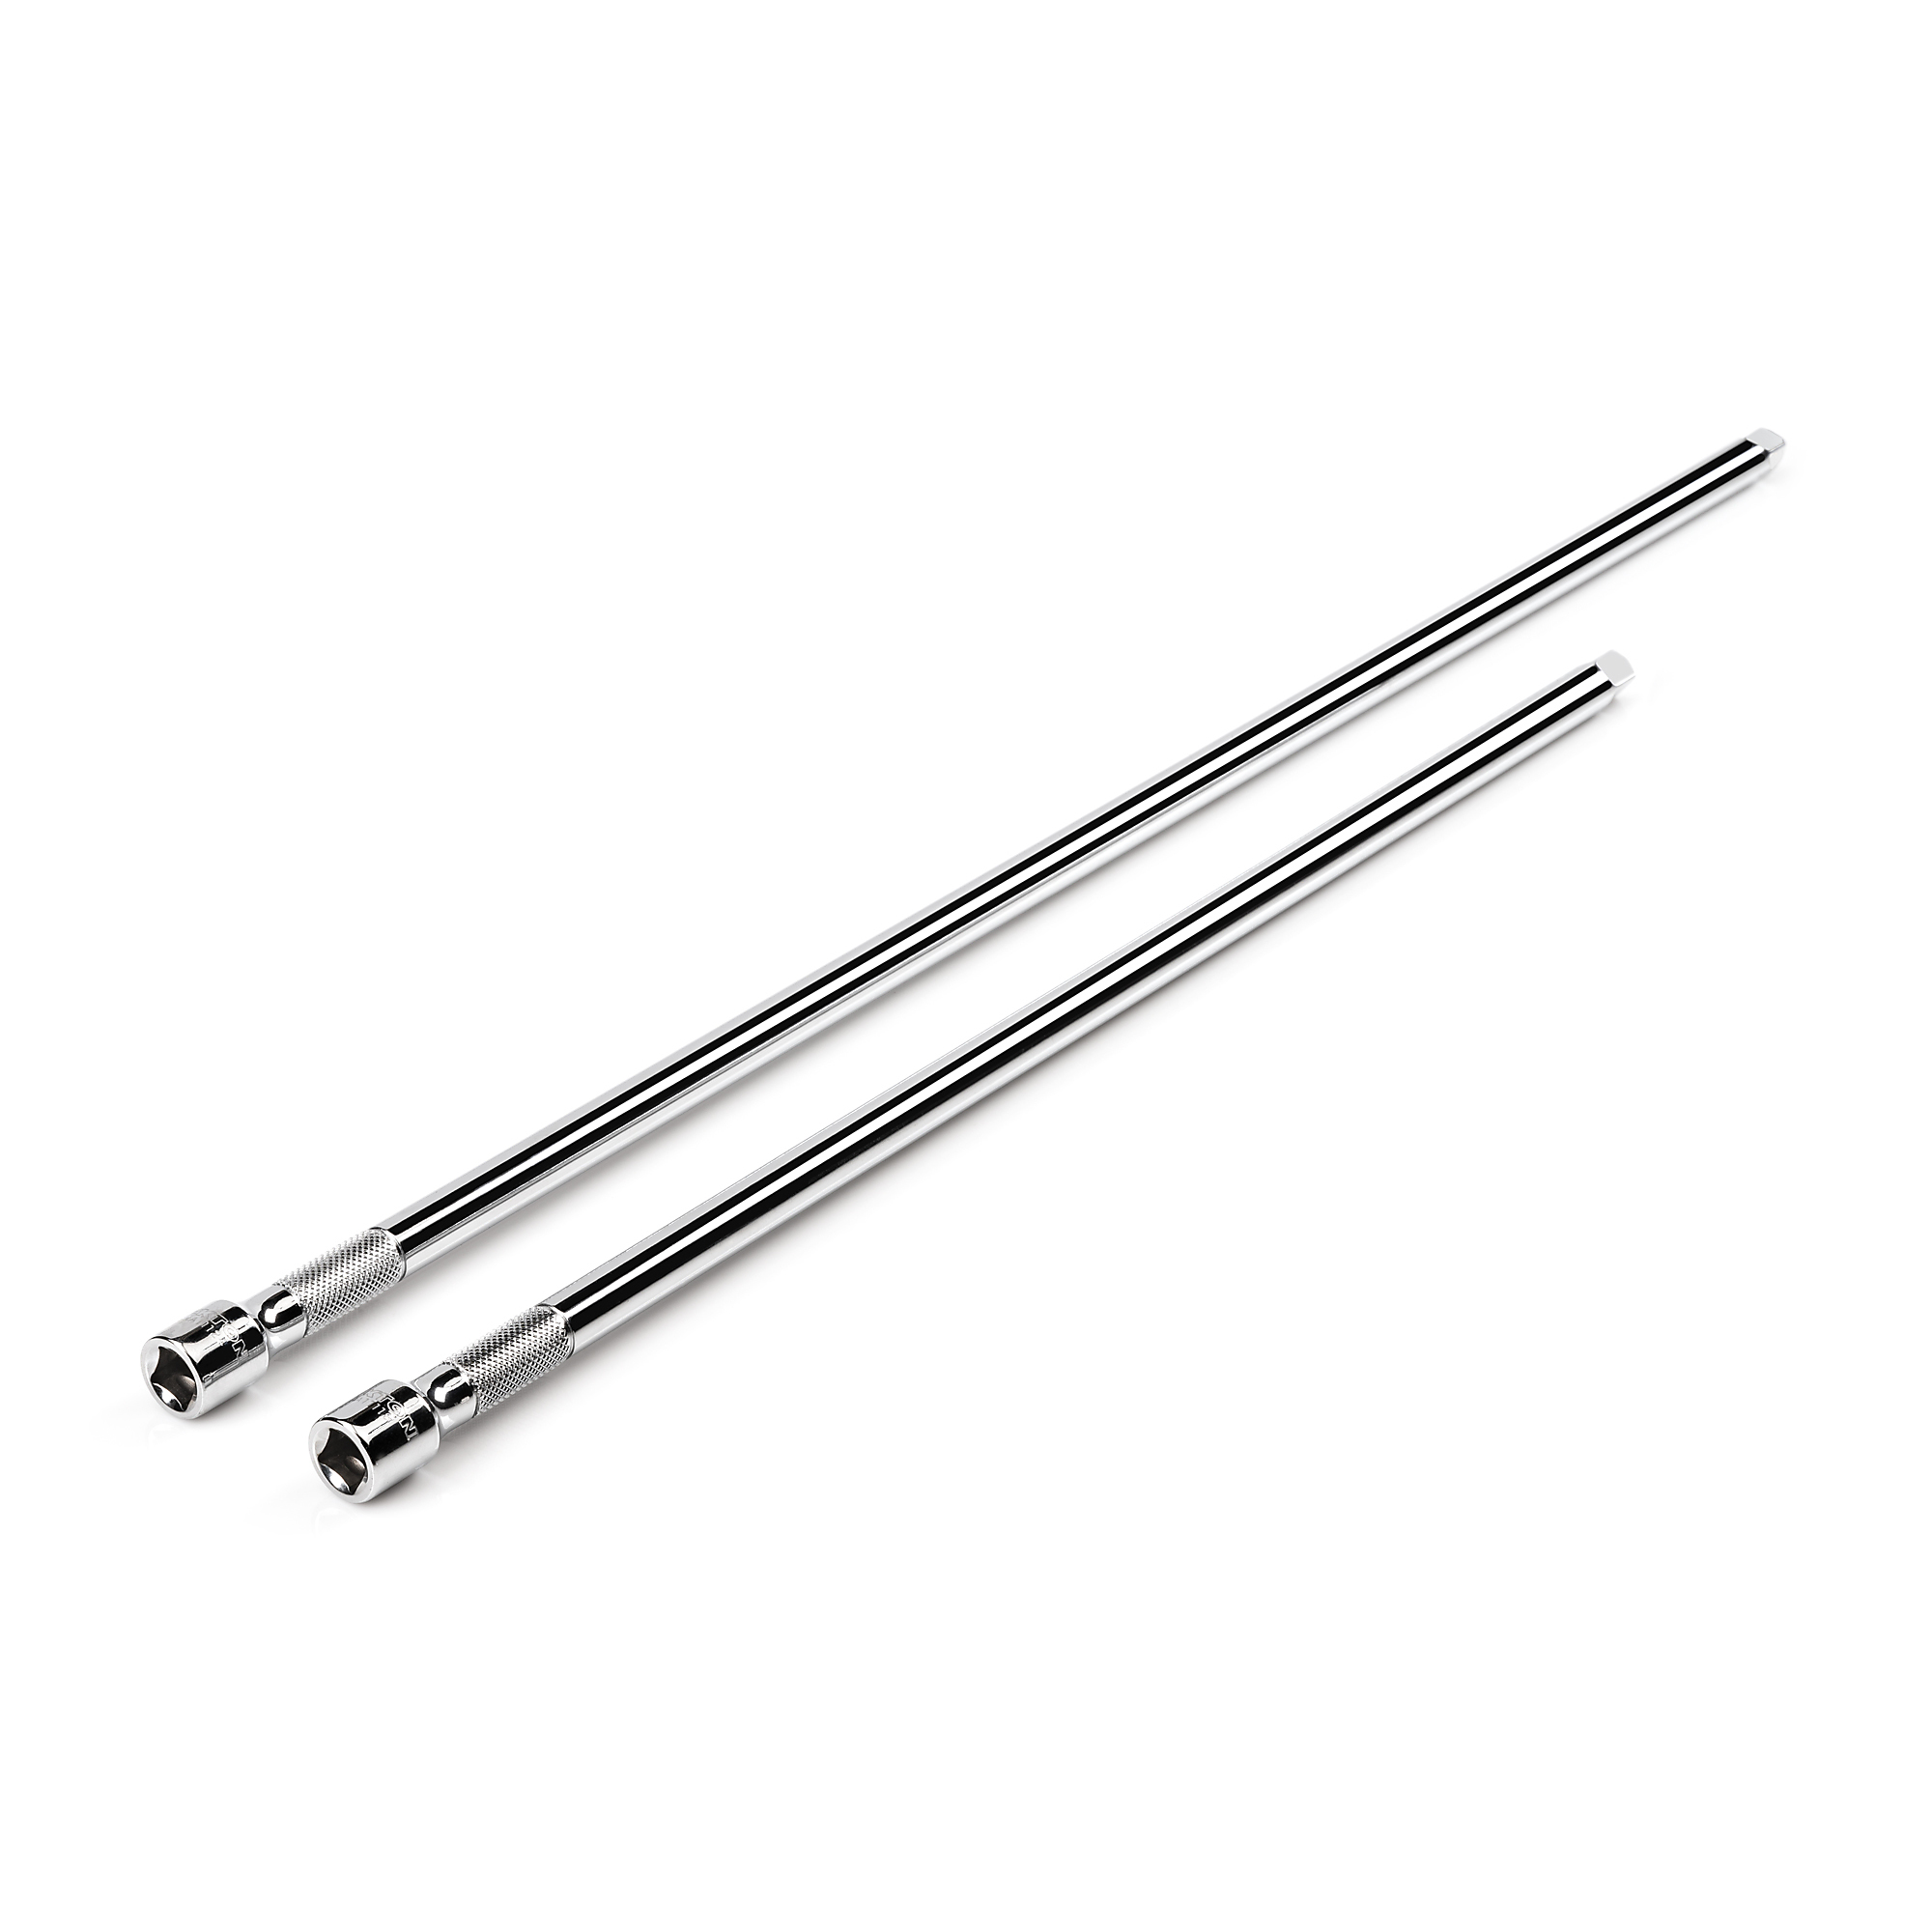 Tekton, 3/8Inch Drive Extension Set, 2-Piece (18 24Inch), Pieces (qty.) 2 Drive Size 3/8 in, Model SHA91012